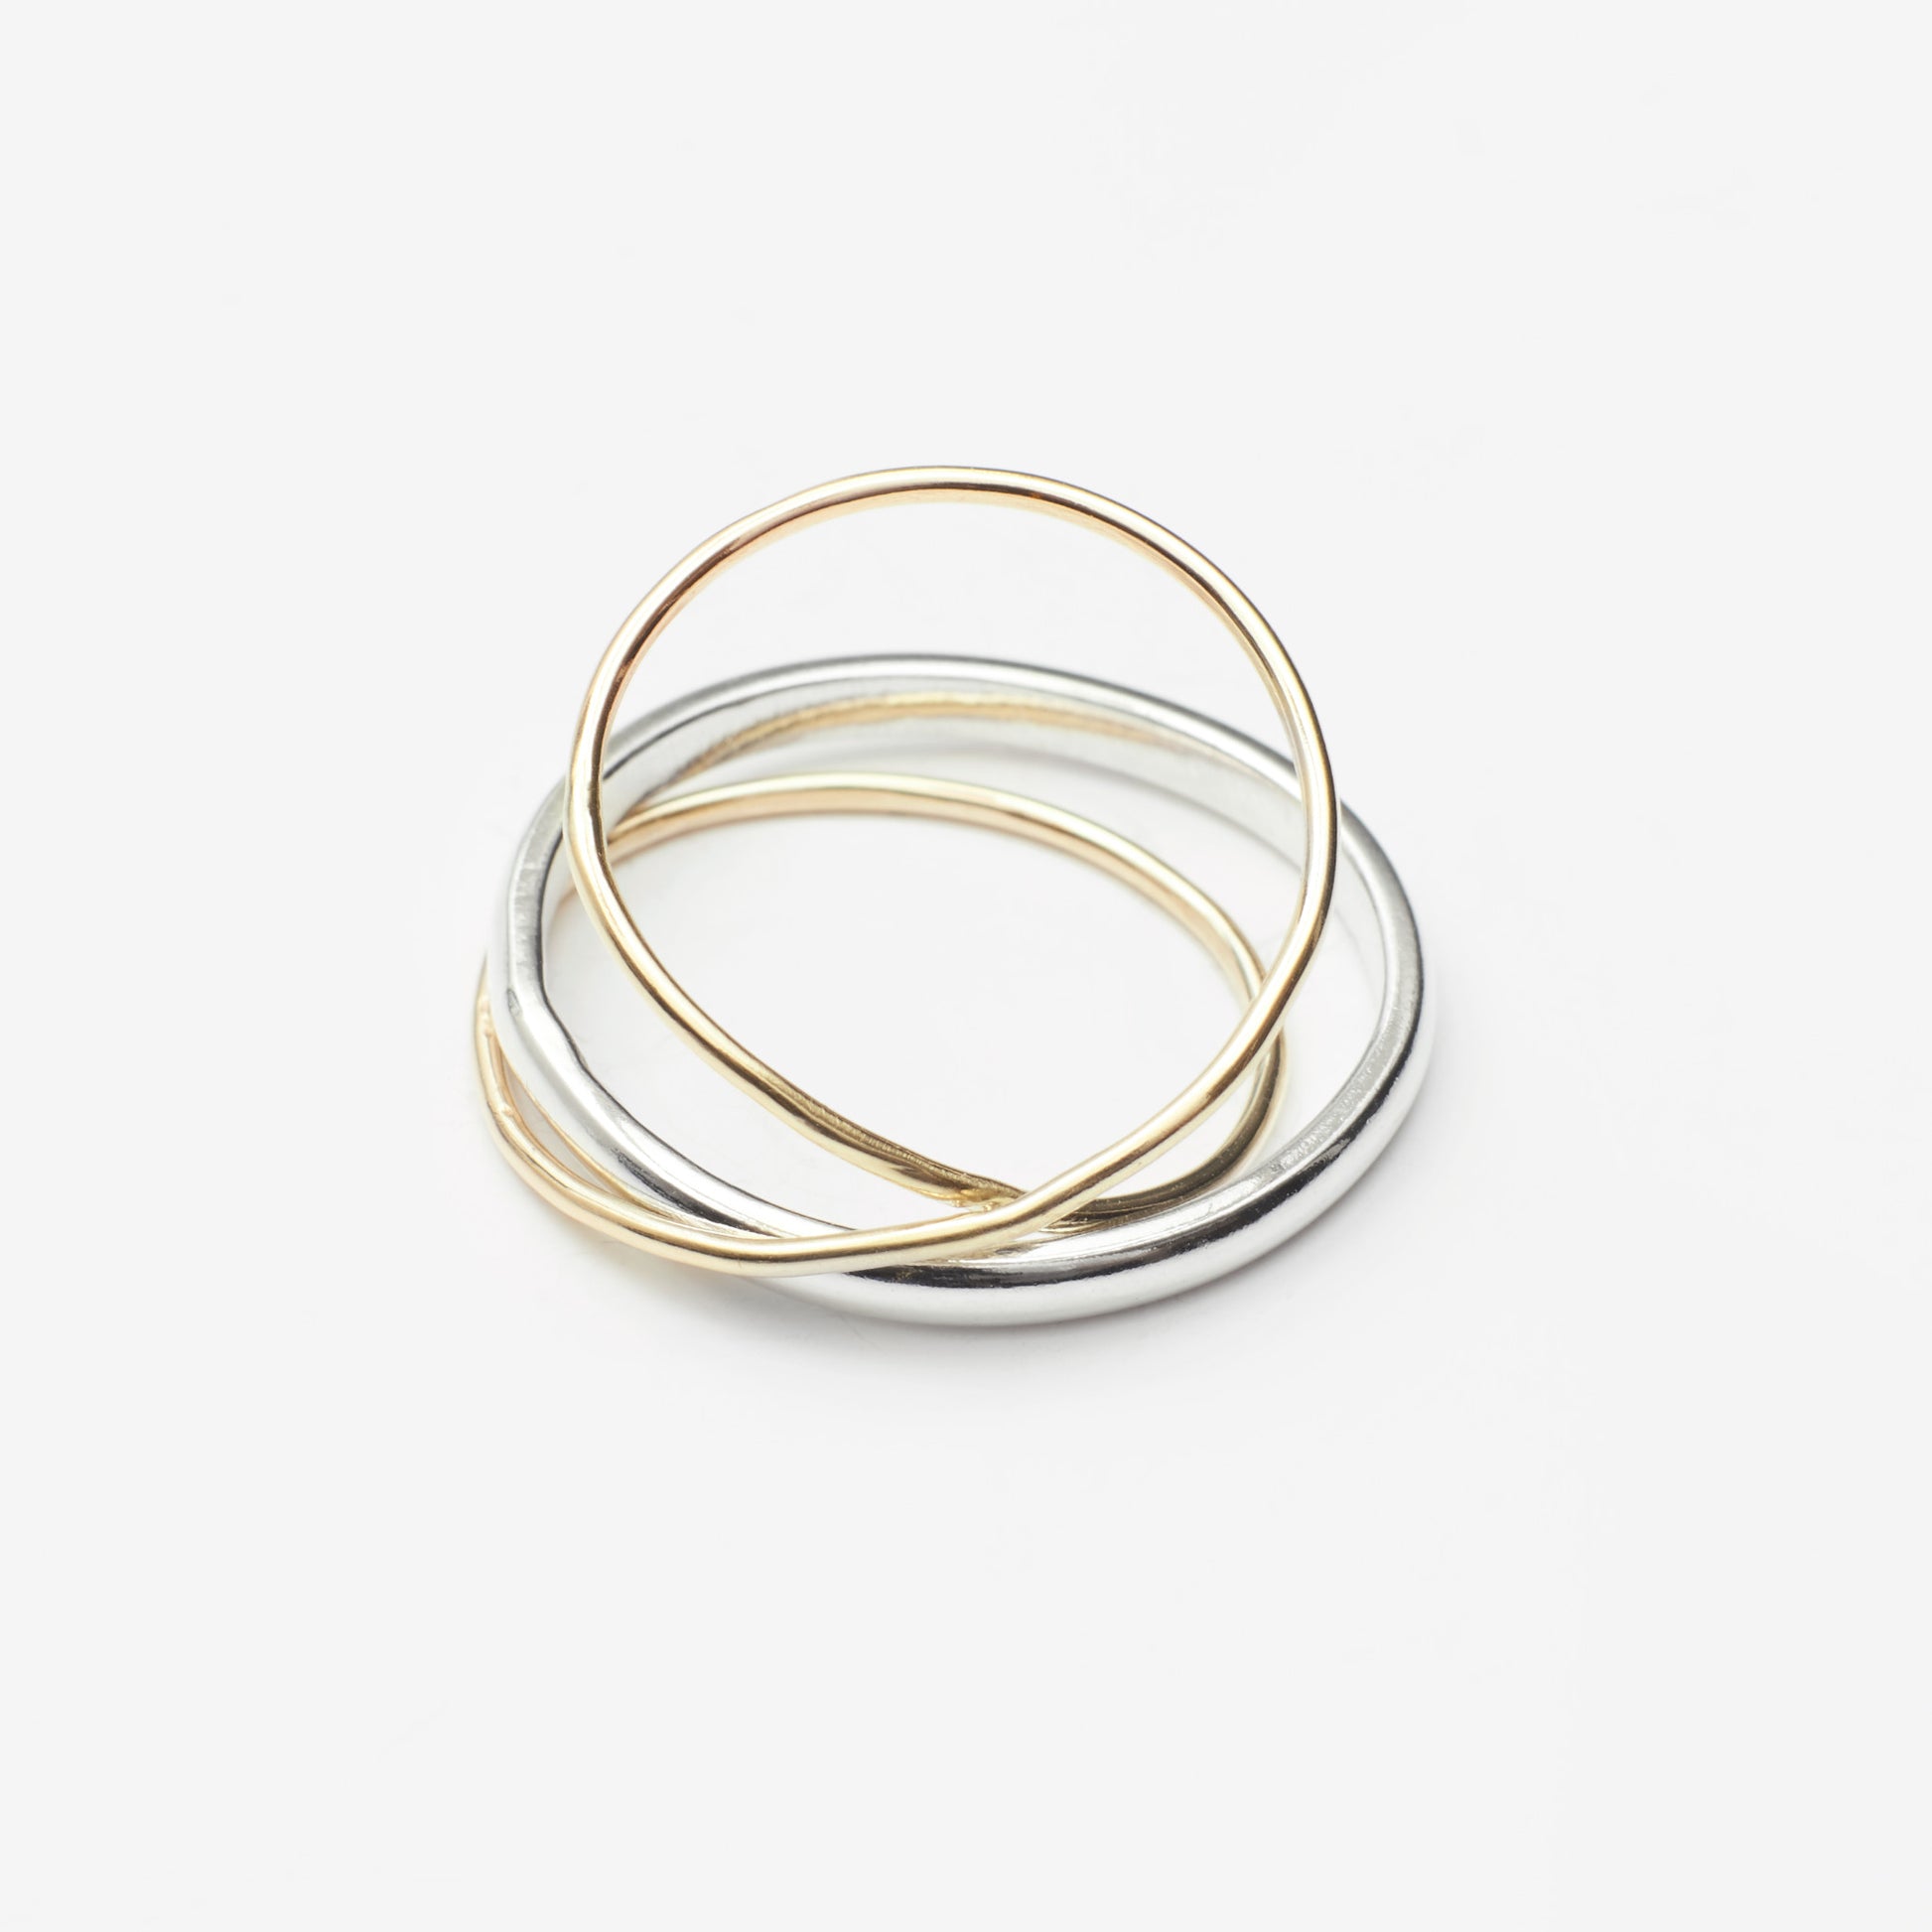 Orbit Ring - Statement Ring - 9ct gold - Sterling Silver - Skomer Studio jewellery collections